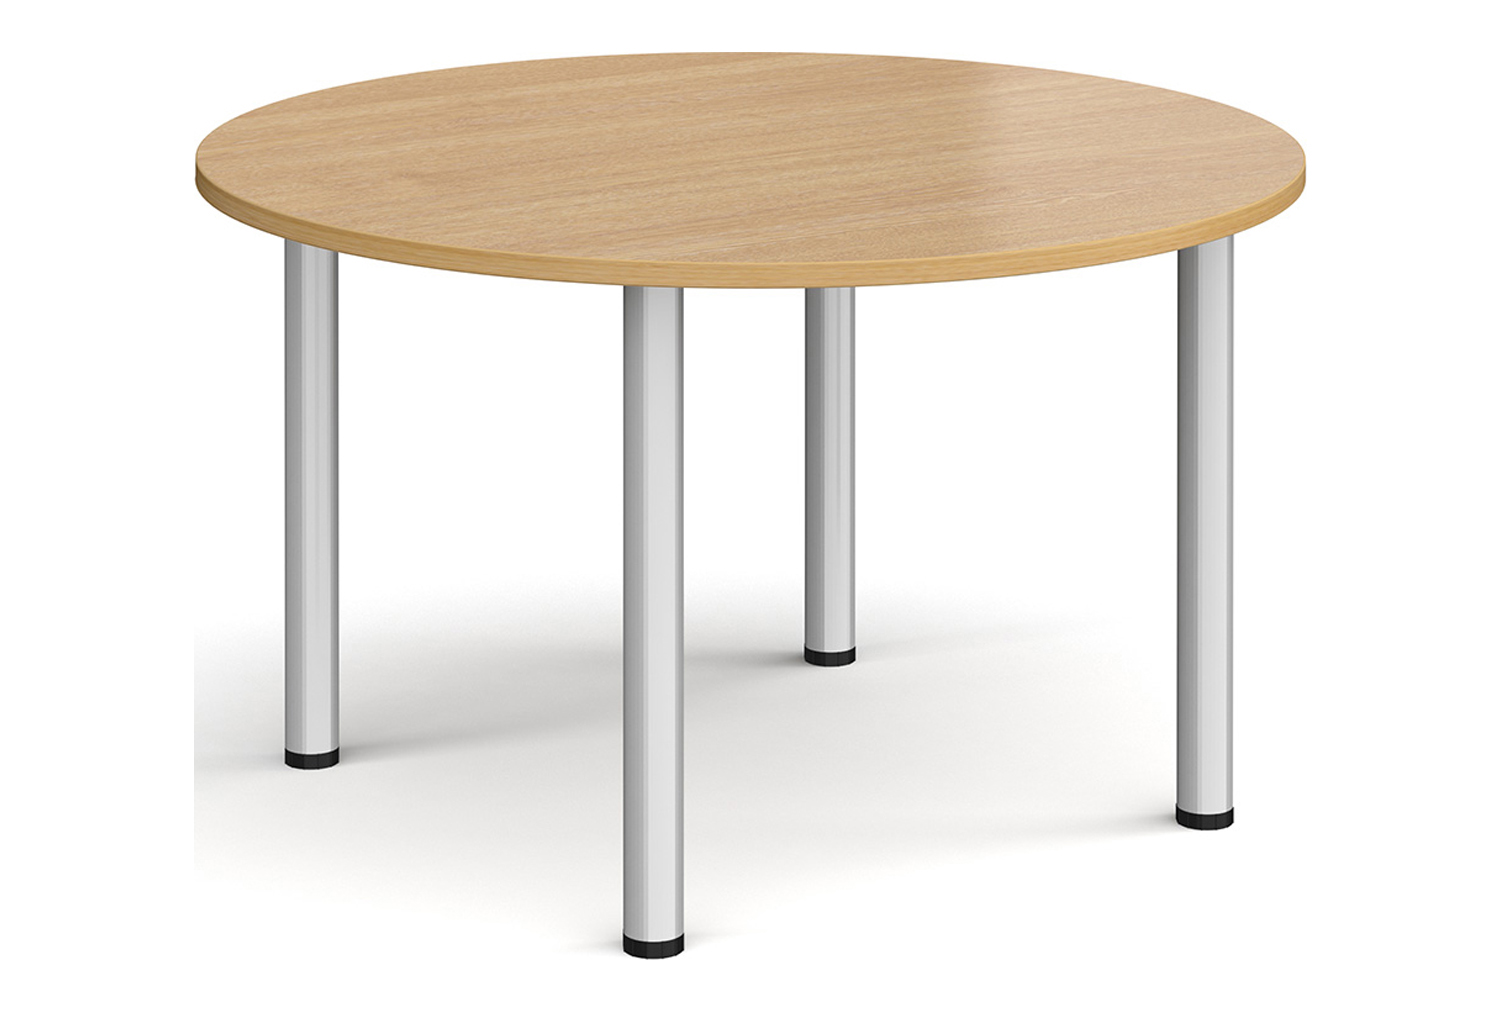 Bowers Round Meeting Table, 120diax73h (cm), Oak, Express Delivery